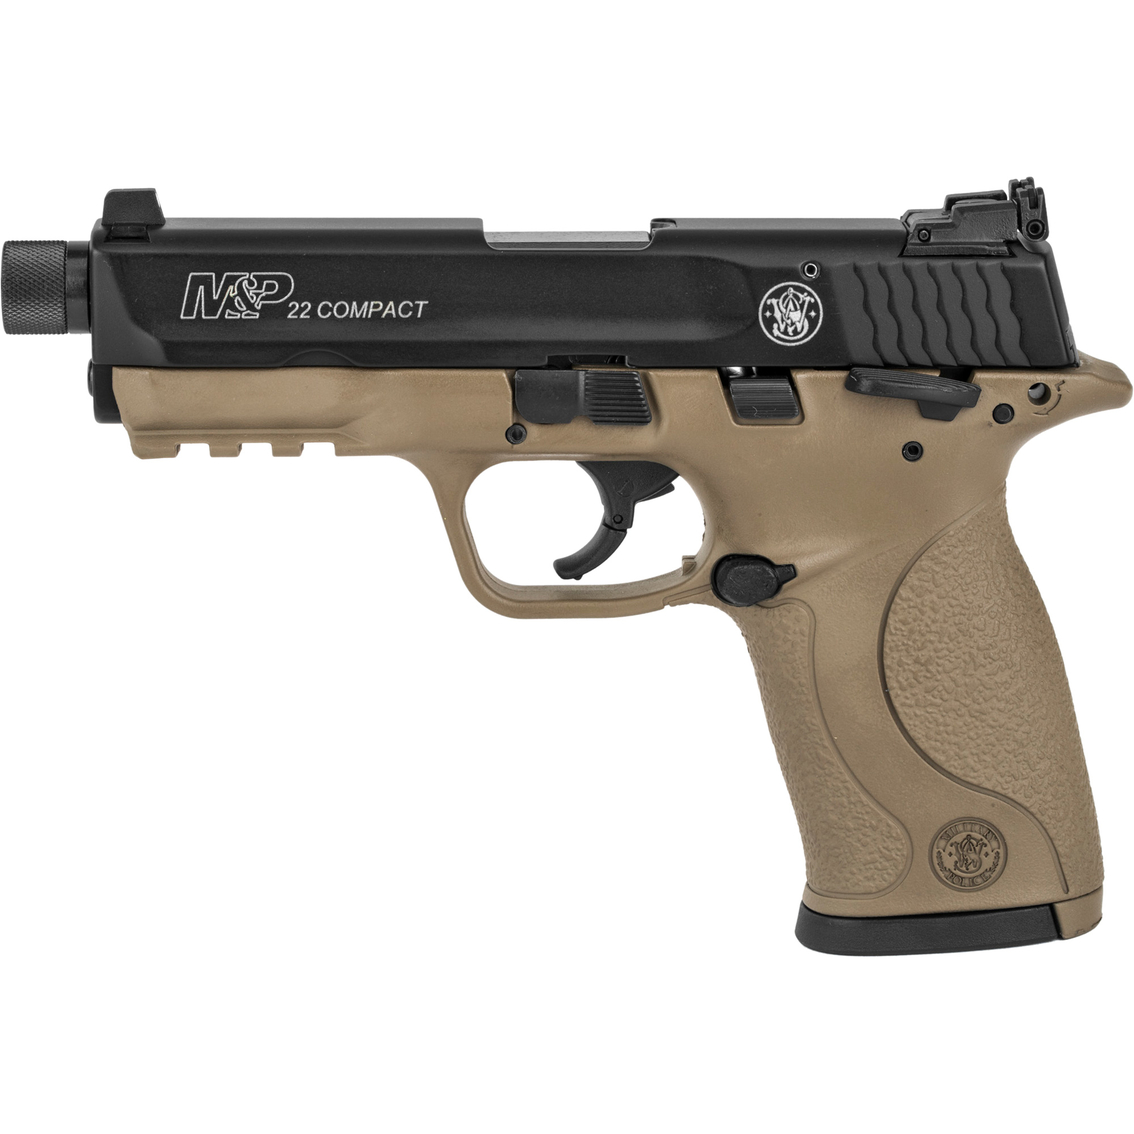 S&W M&P 22 LR 3.5 in. Barrel 10 Rds 2-Mags Pistol Flat Dark Earth - Image 2 of 3